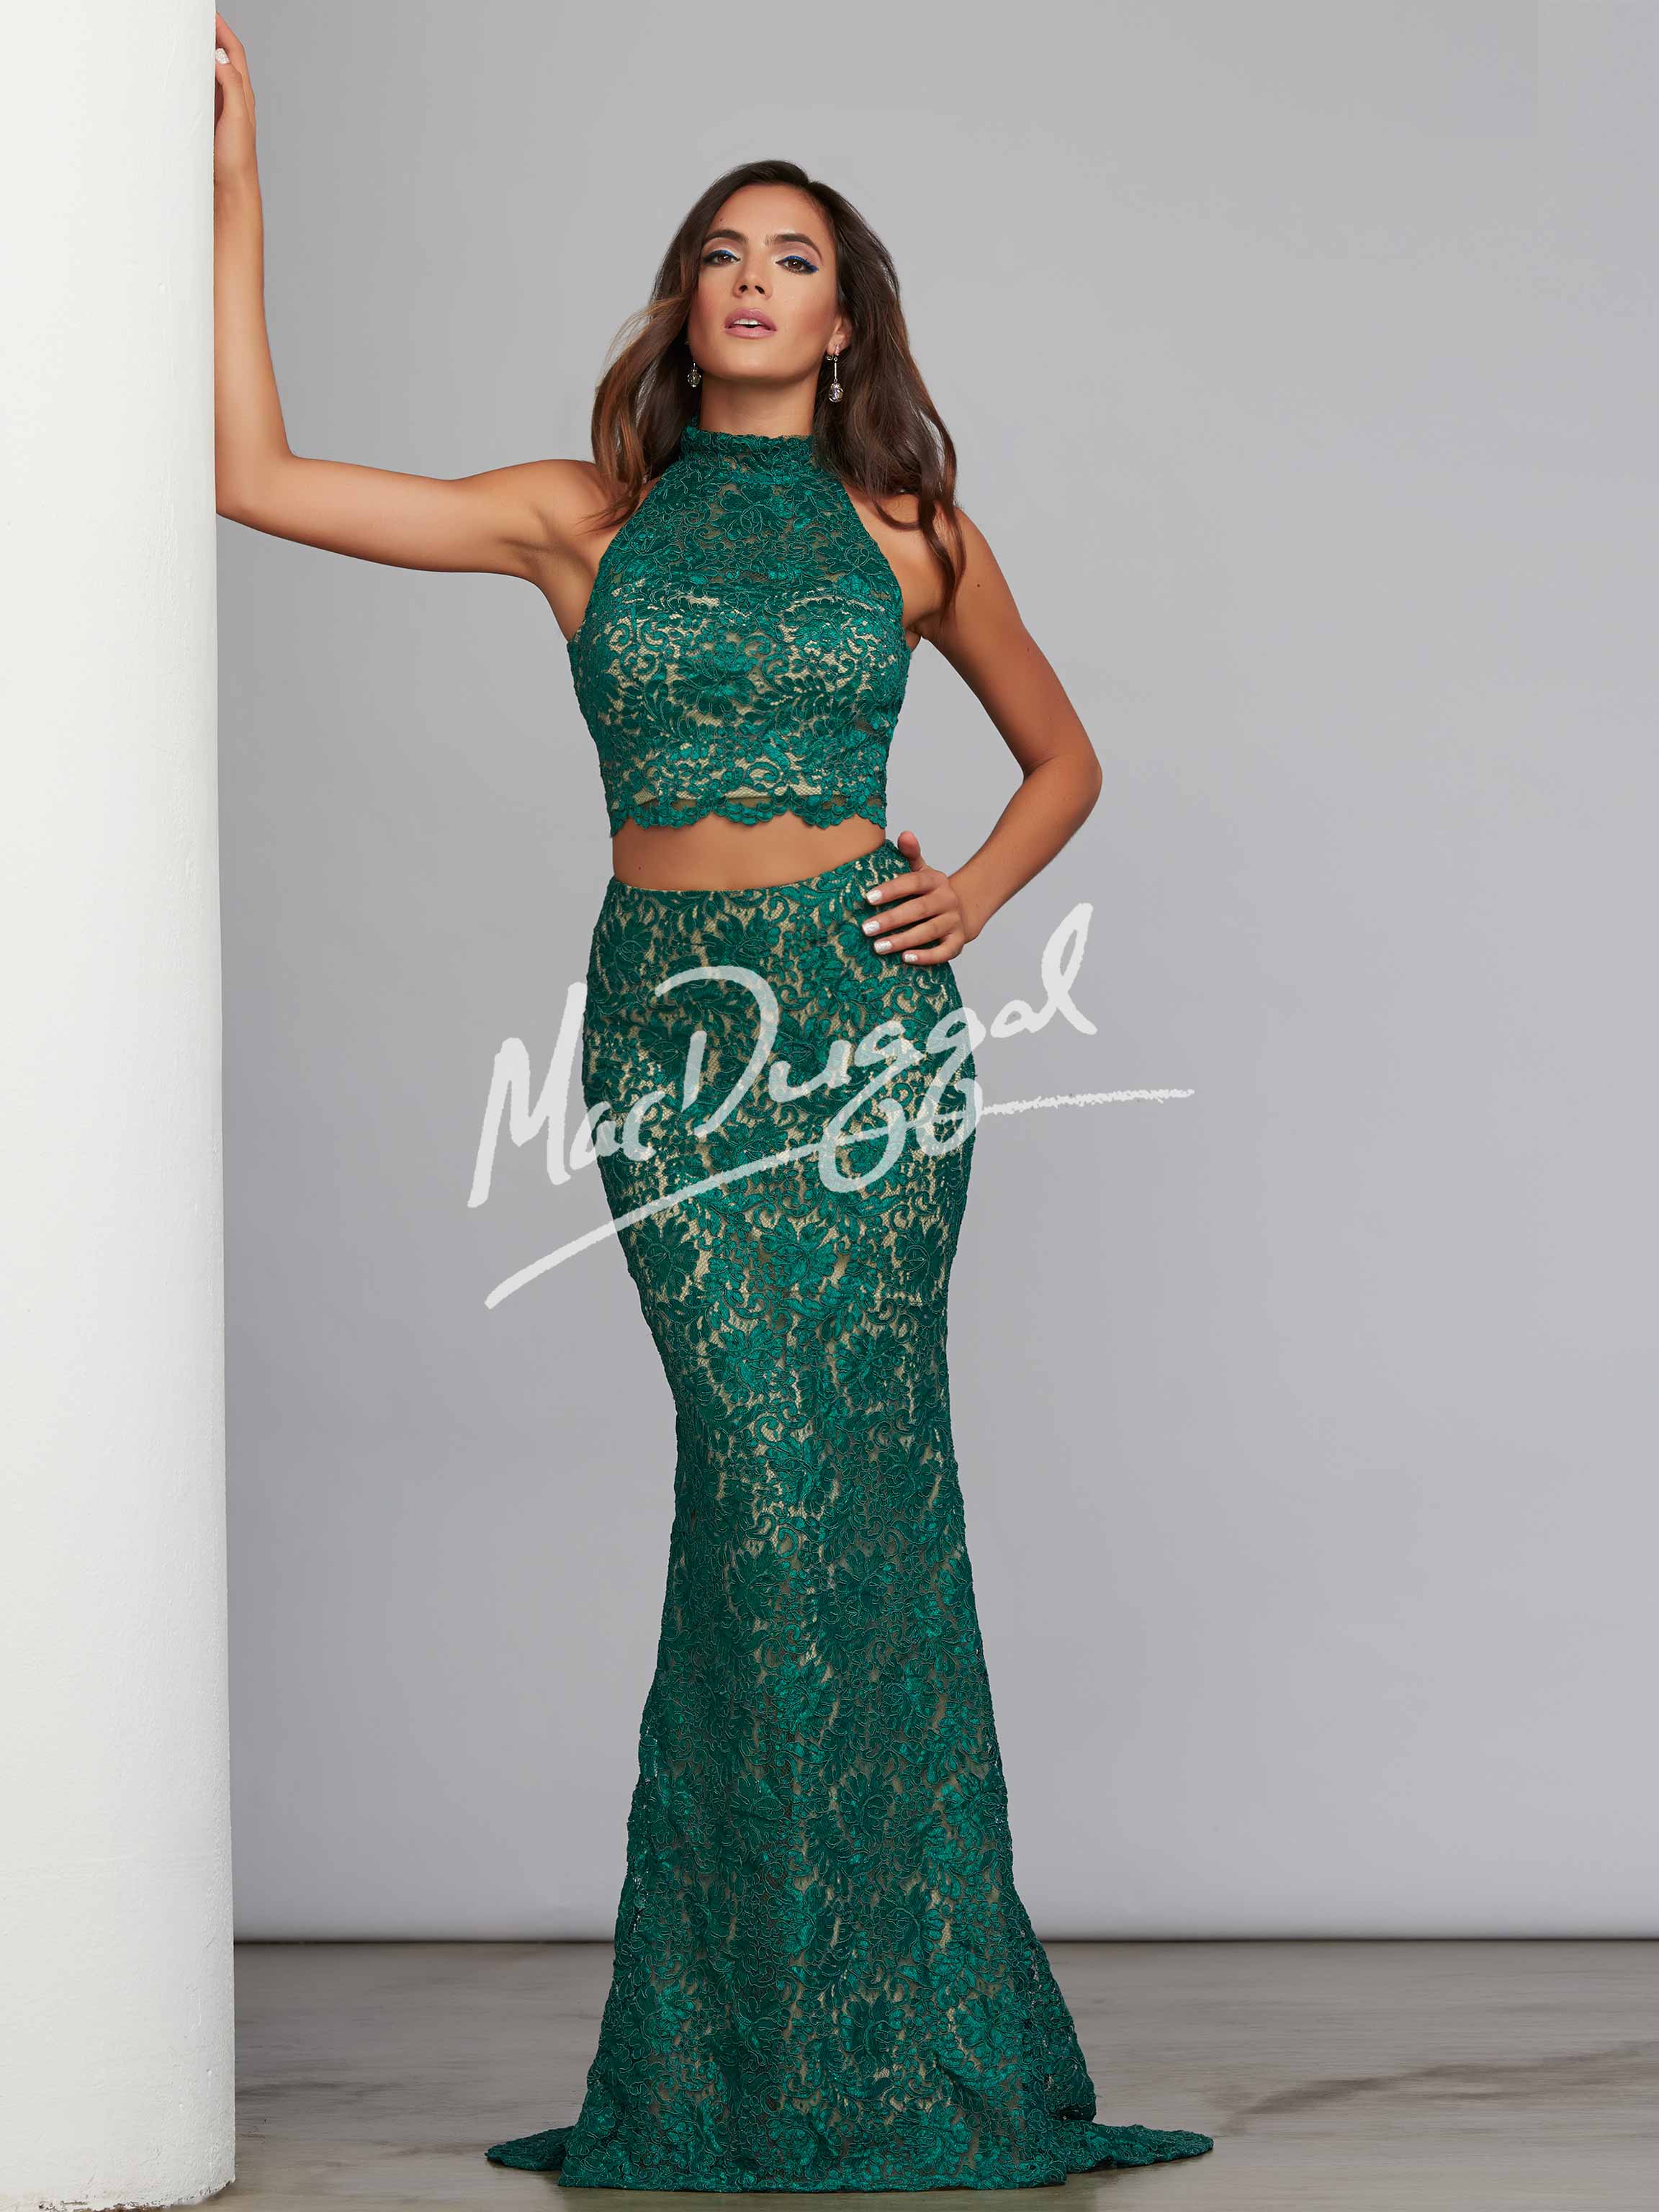 Emerald Green Two Piece Dress - Always In Fashion For All Occasions